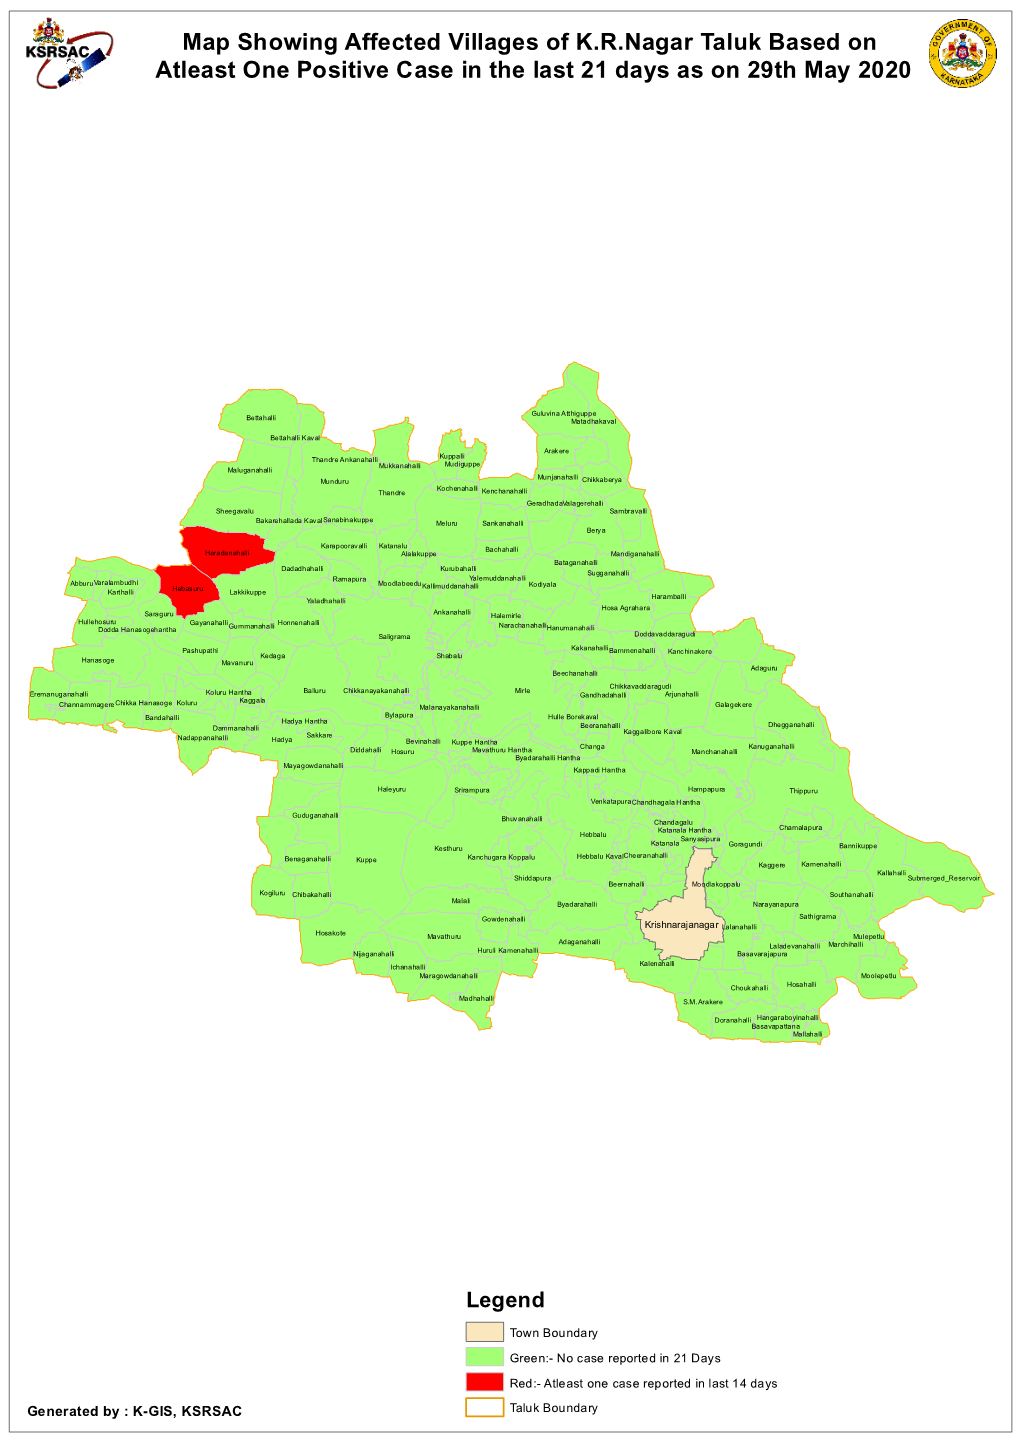 Map Showing Affected Villages of K.R.Nagar Taluk Based on Atleast One Positive Case in the Last 21 Days As on 29Th May 2020